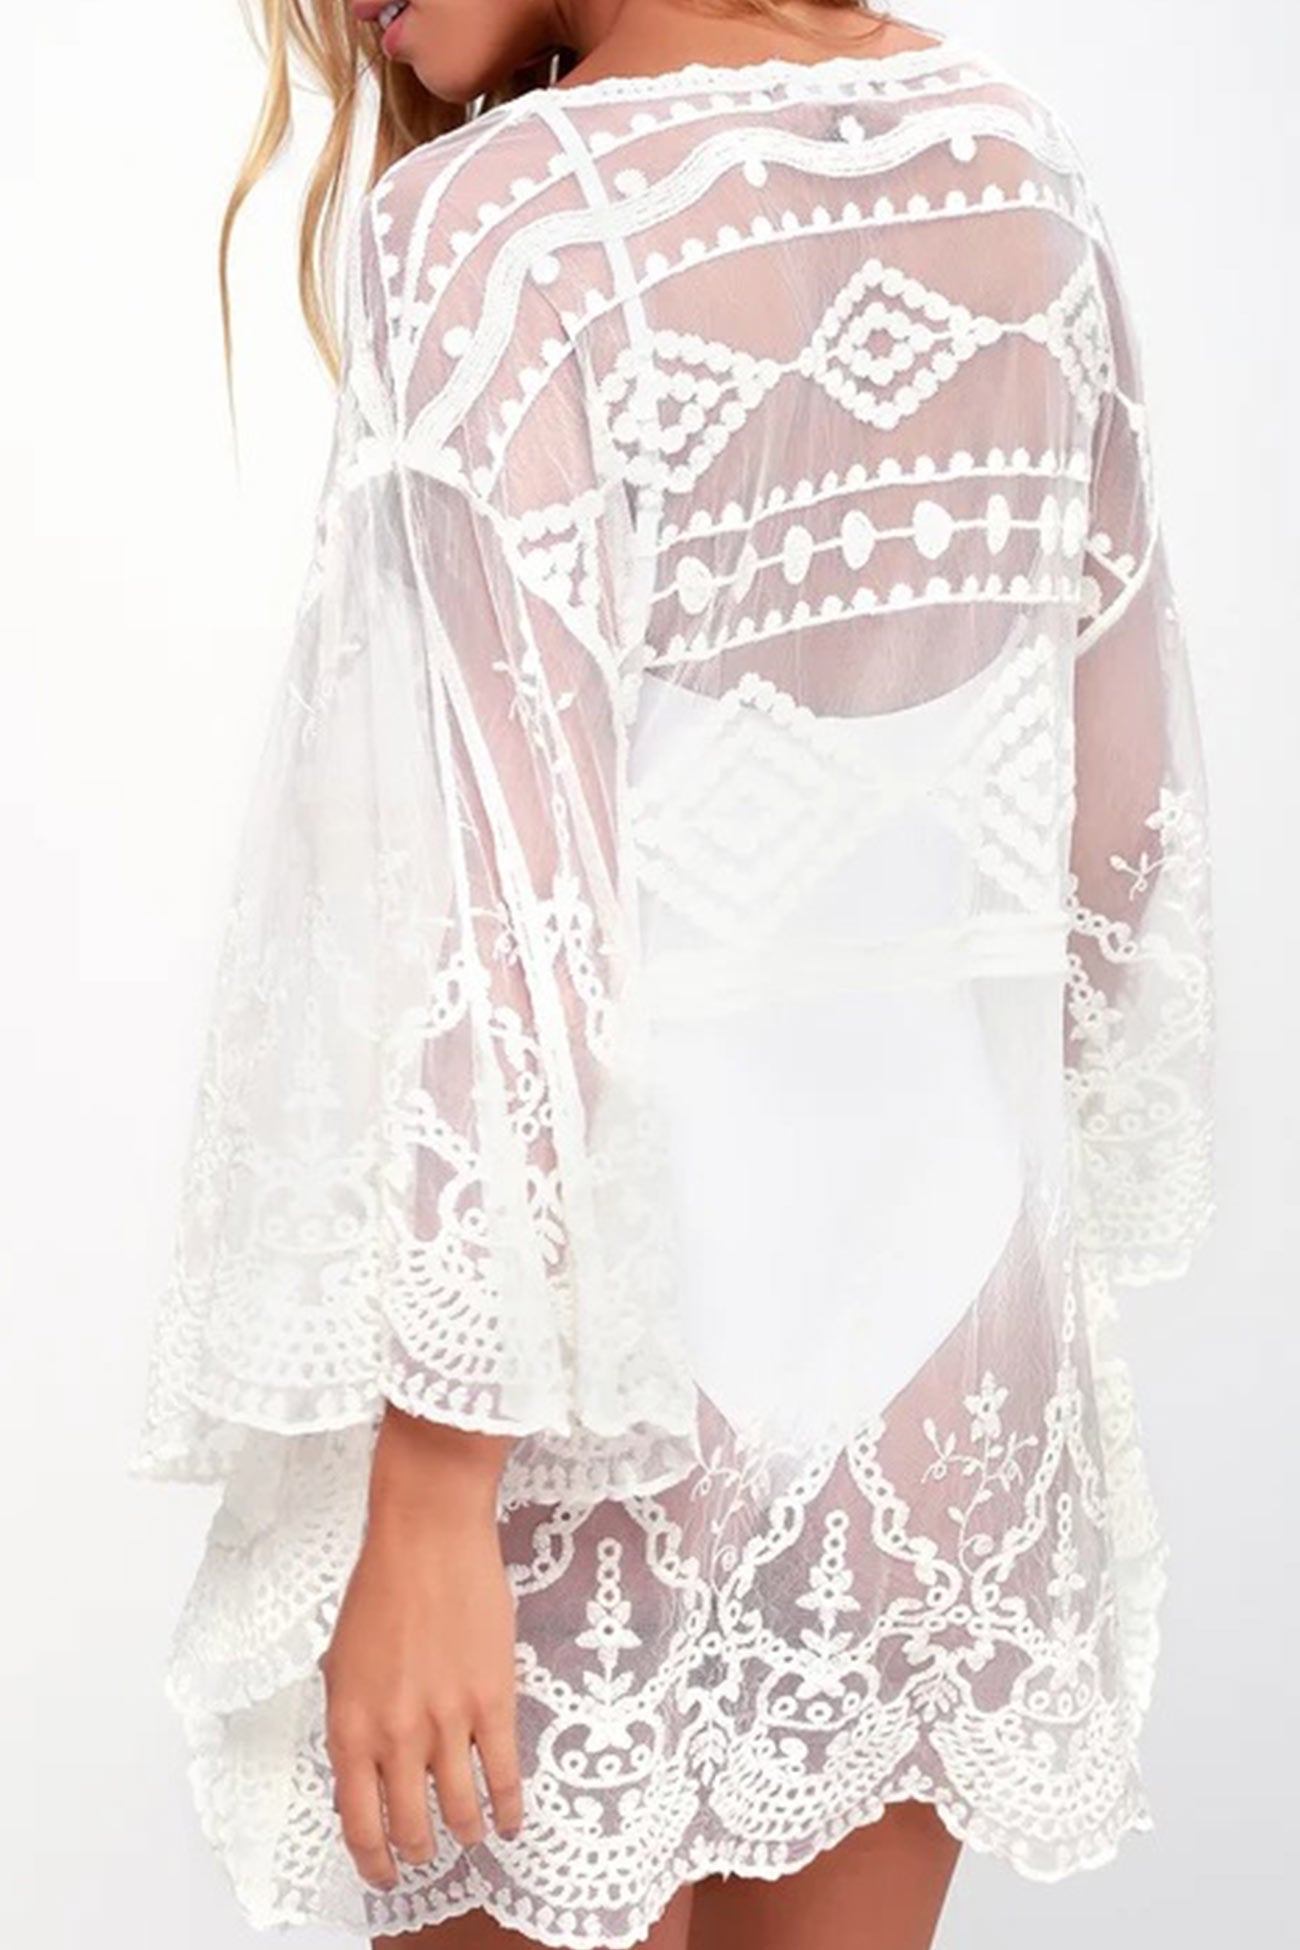 Mesh Lace Crochet Cover-up Dress